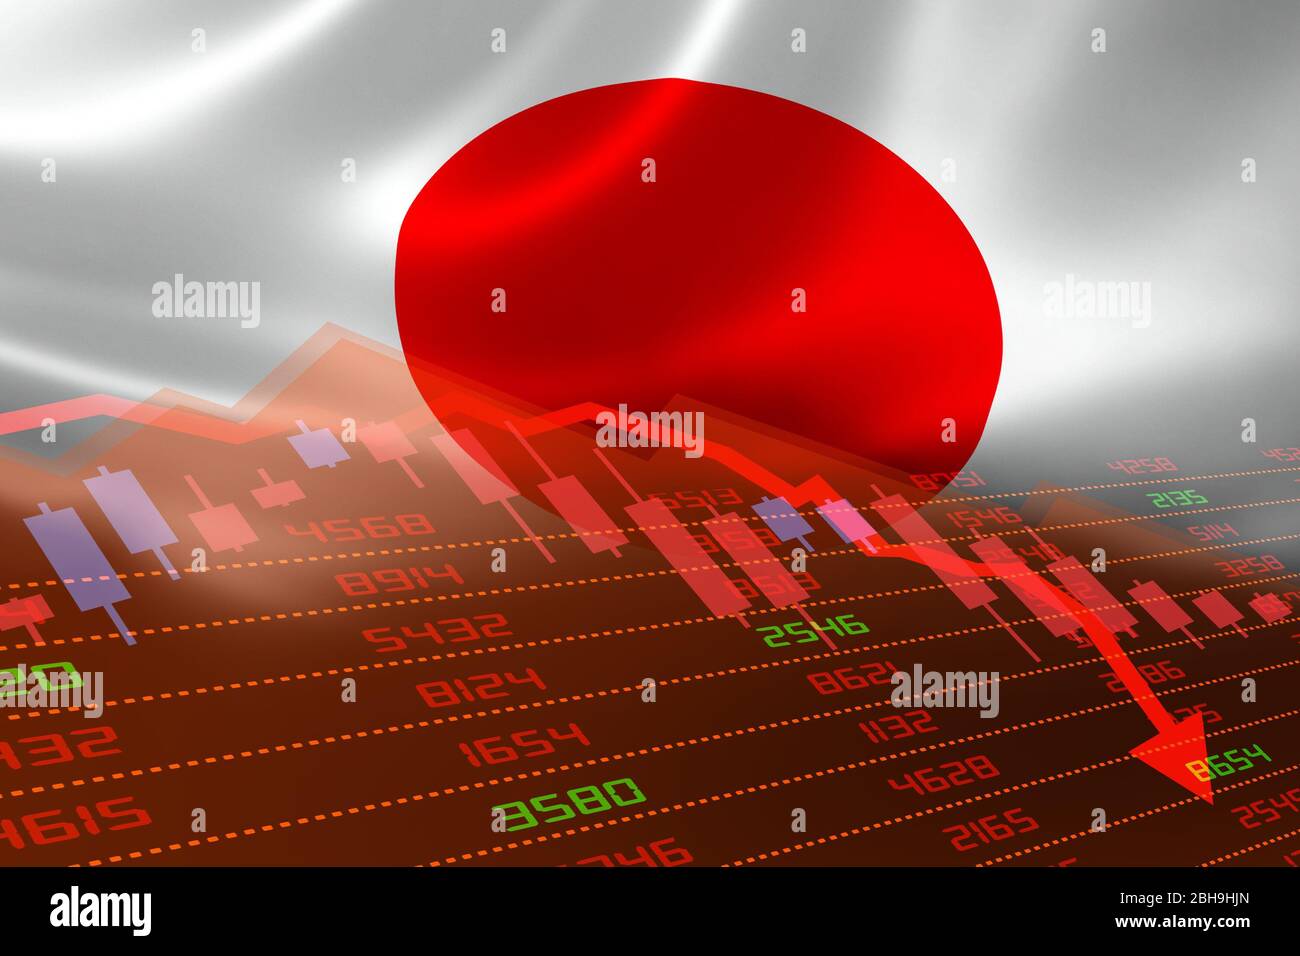 Japan economic downturn with stock exchange market showing stock chart down and in red negative territory. Business and financial money market crisis Stock Photo